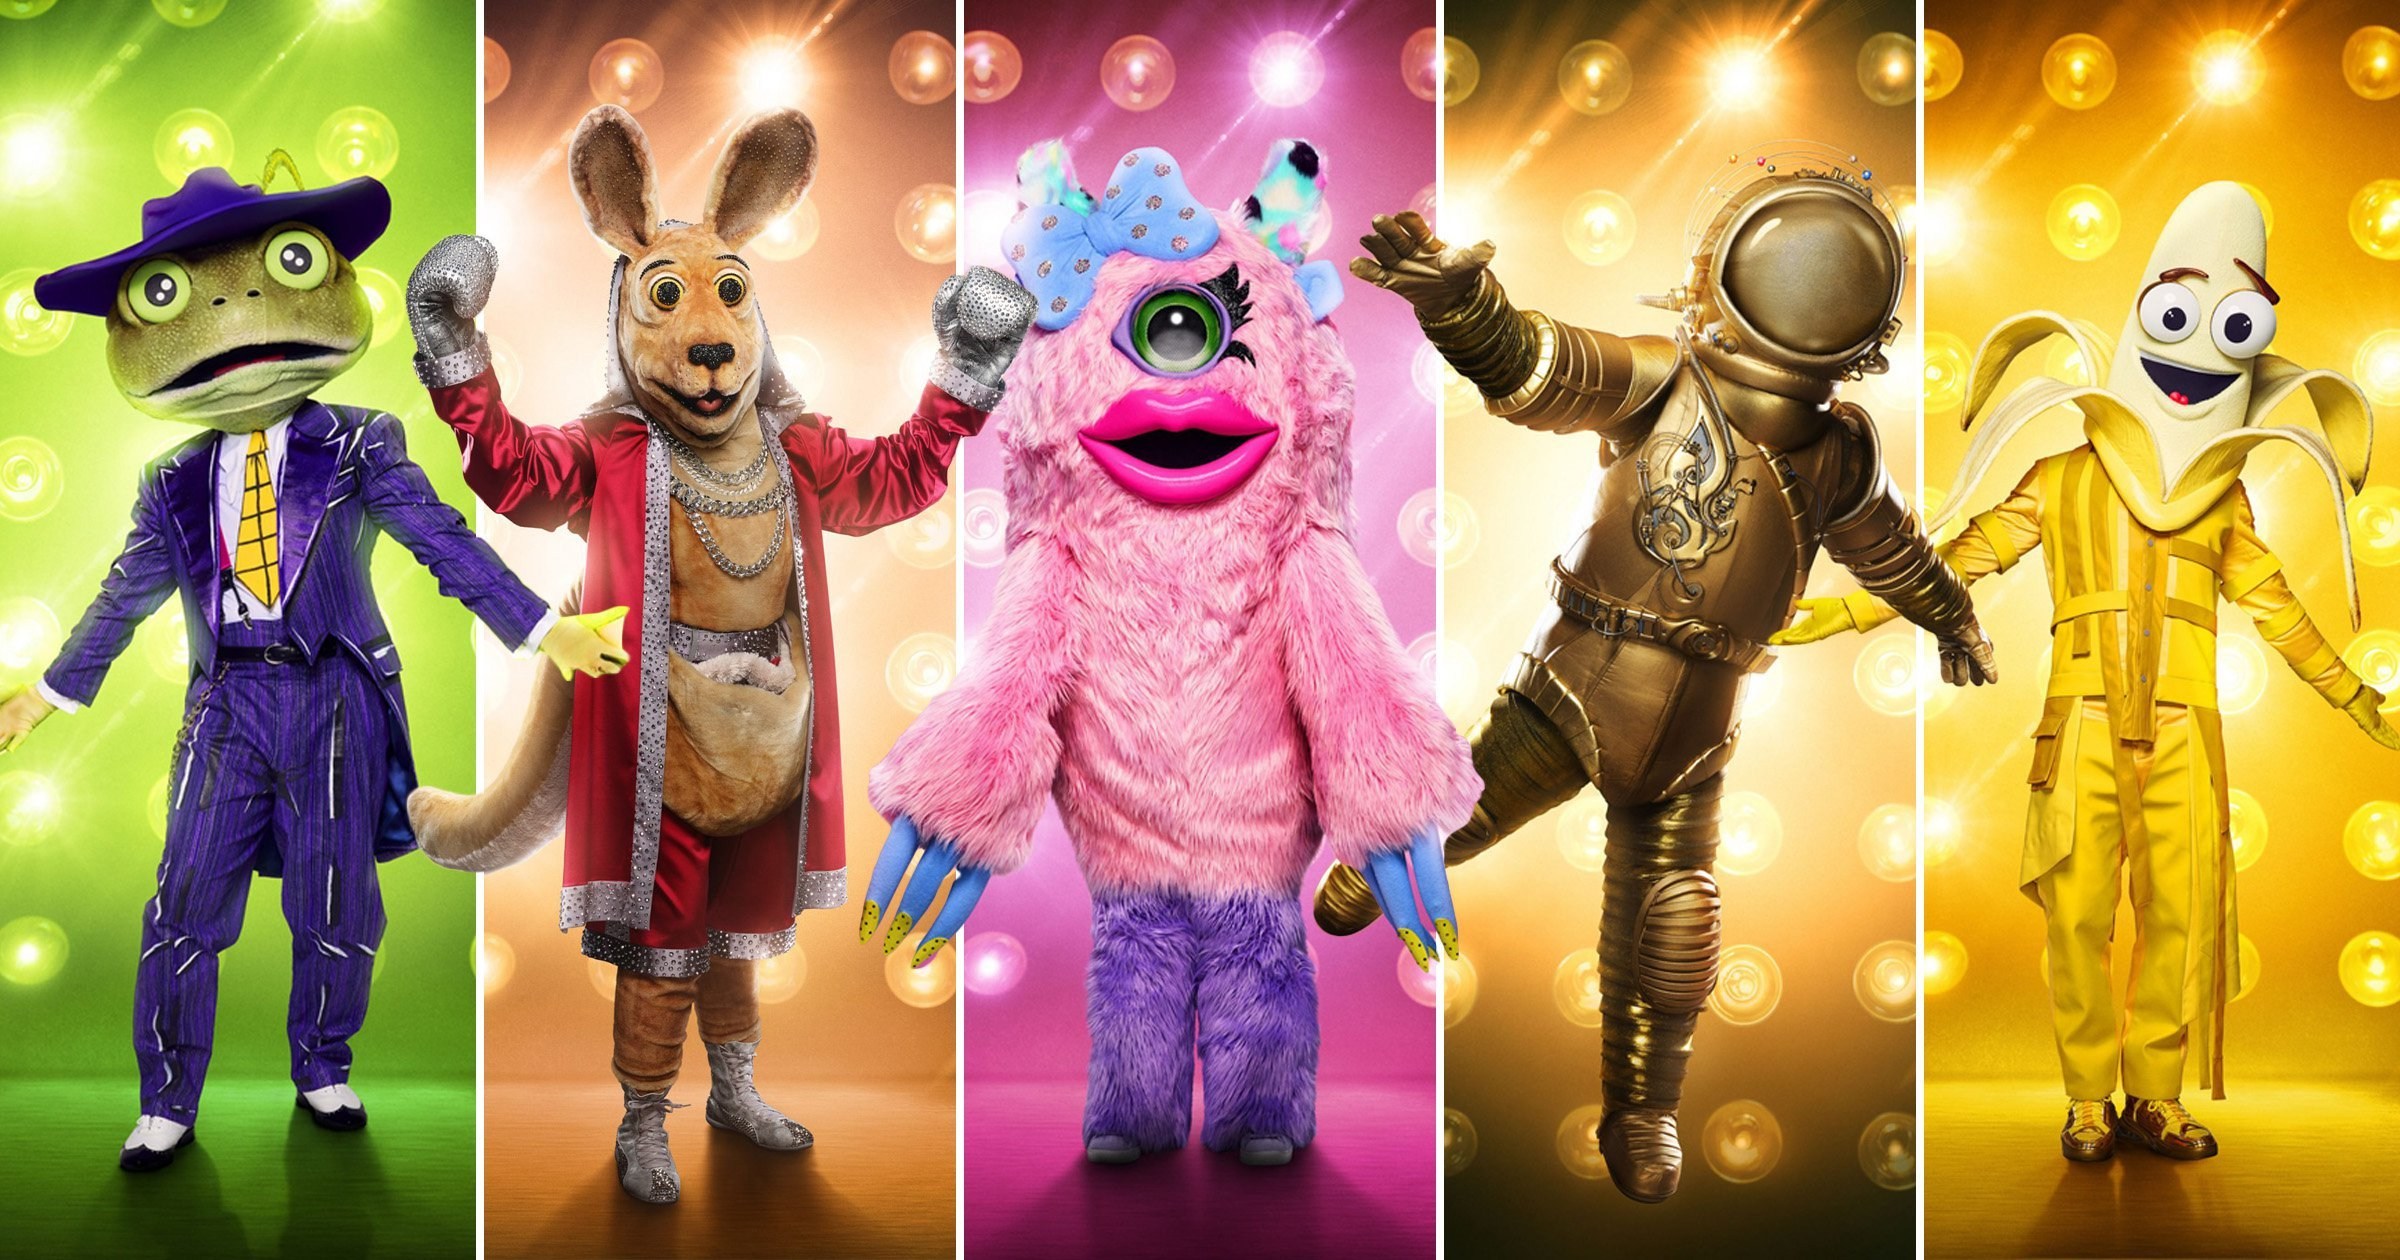 The Masked Singer US costume designer reveals wildest costumes yet – and drops hints about celebrities’ identities